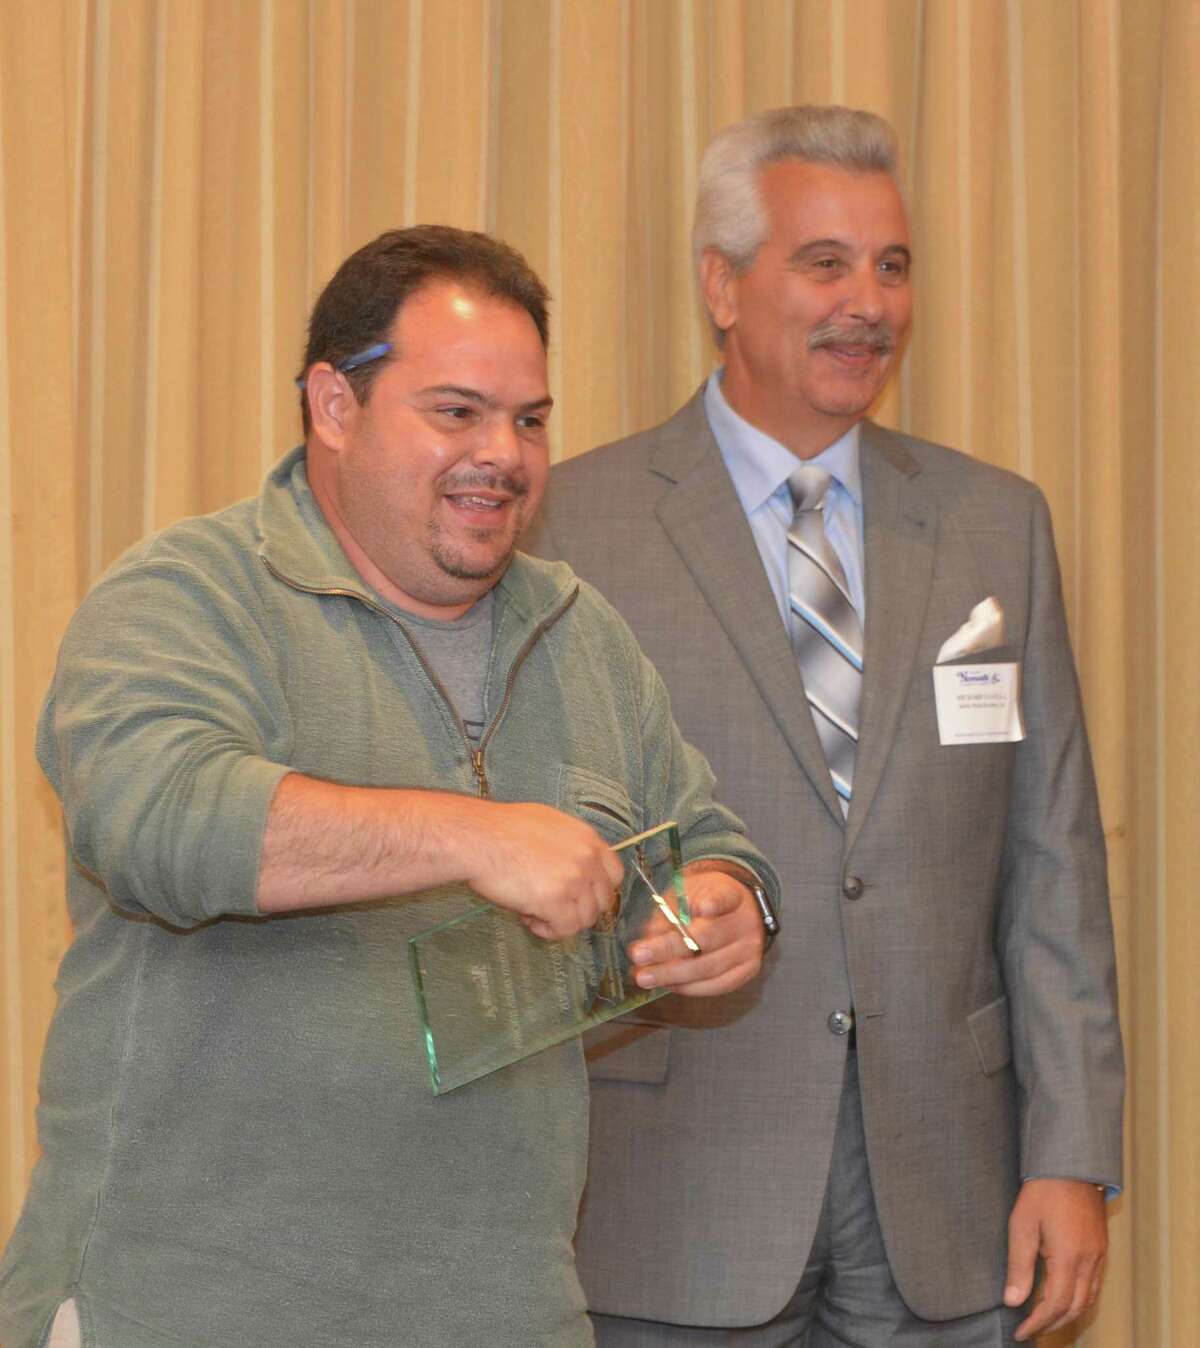 Luis Solis, owner of Norwalk Pizza and Pasta and Don Carmelos accepts the Restauratuer of the Year Award during the Greater Norwalk Chamber of Commerce 2017 Small Business Awards on Wednesday June 7, 2017 at the Norwalk Inn, in Norwalk Conn.